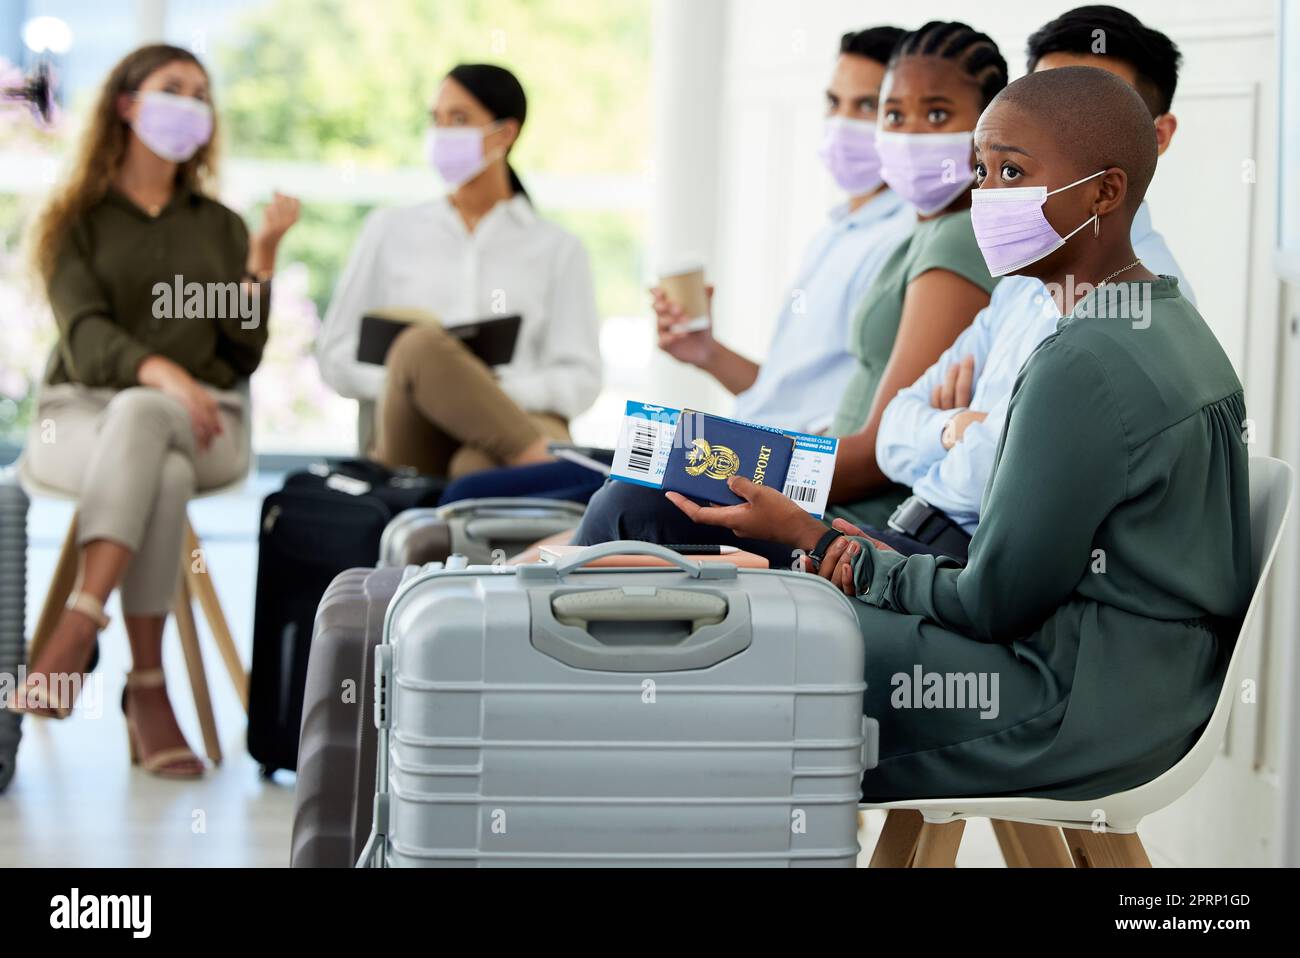 Travel, passport and covid compliance people with mask at airport for safety from corona virus traveling business class. Business people in global inclusivity with airplane ticket and luggage Stock Photo